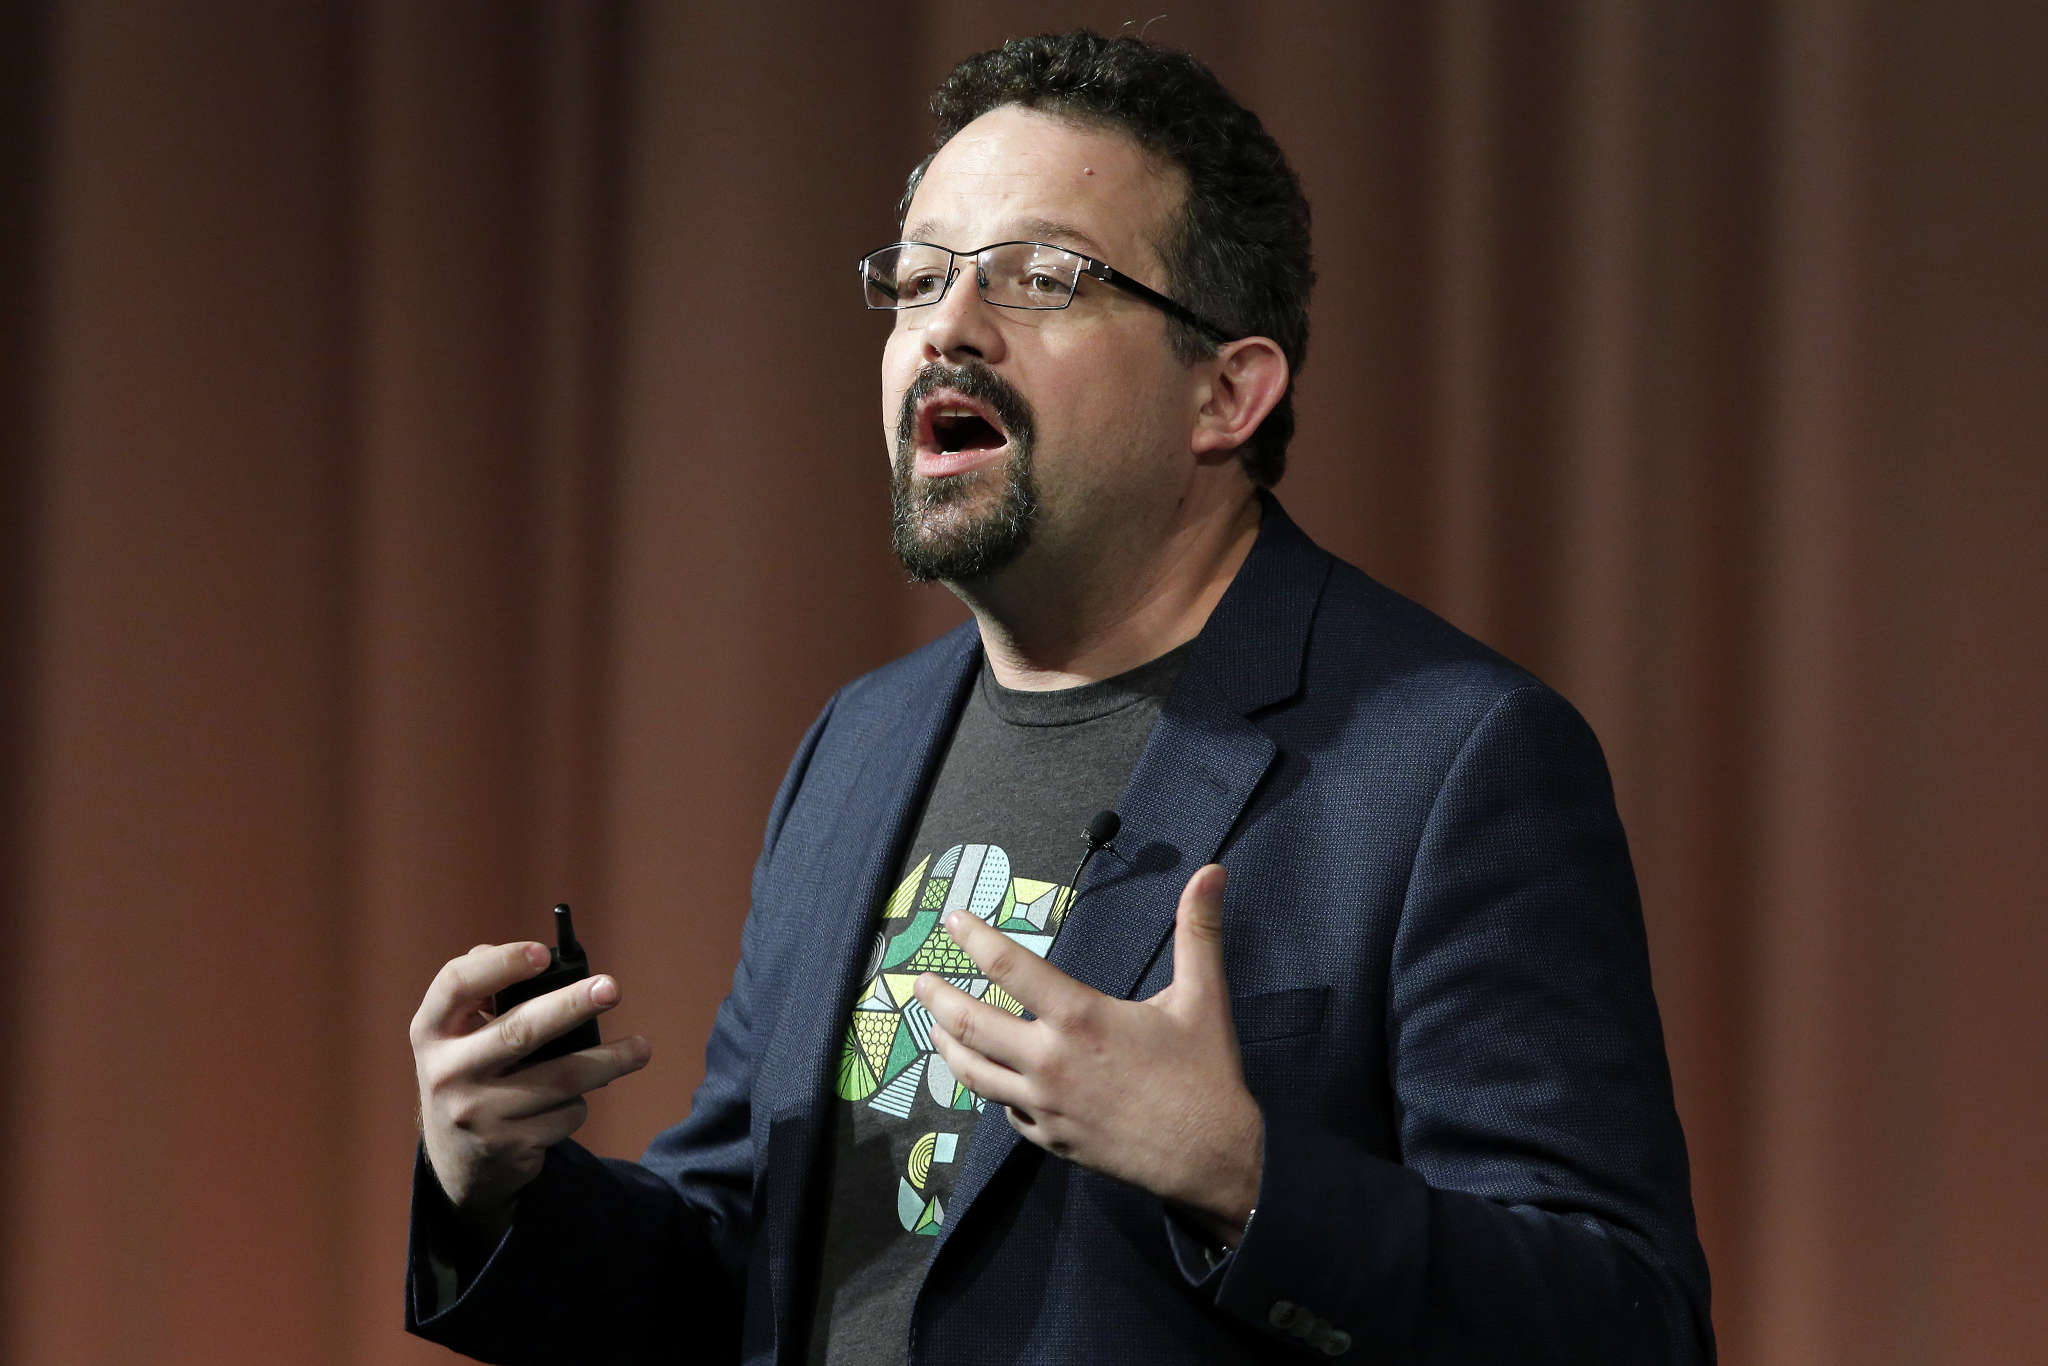 Phil Libin, the former Evernote CEO, recently became a partner at General Catalyst.
